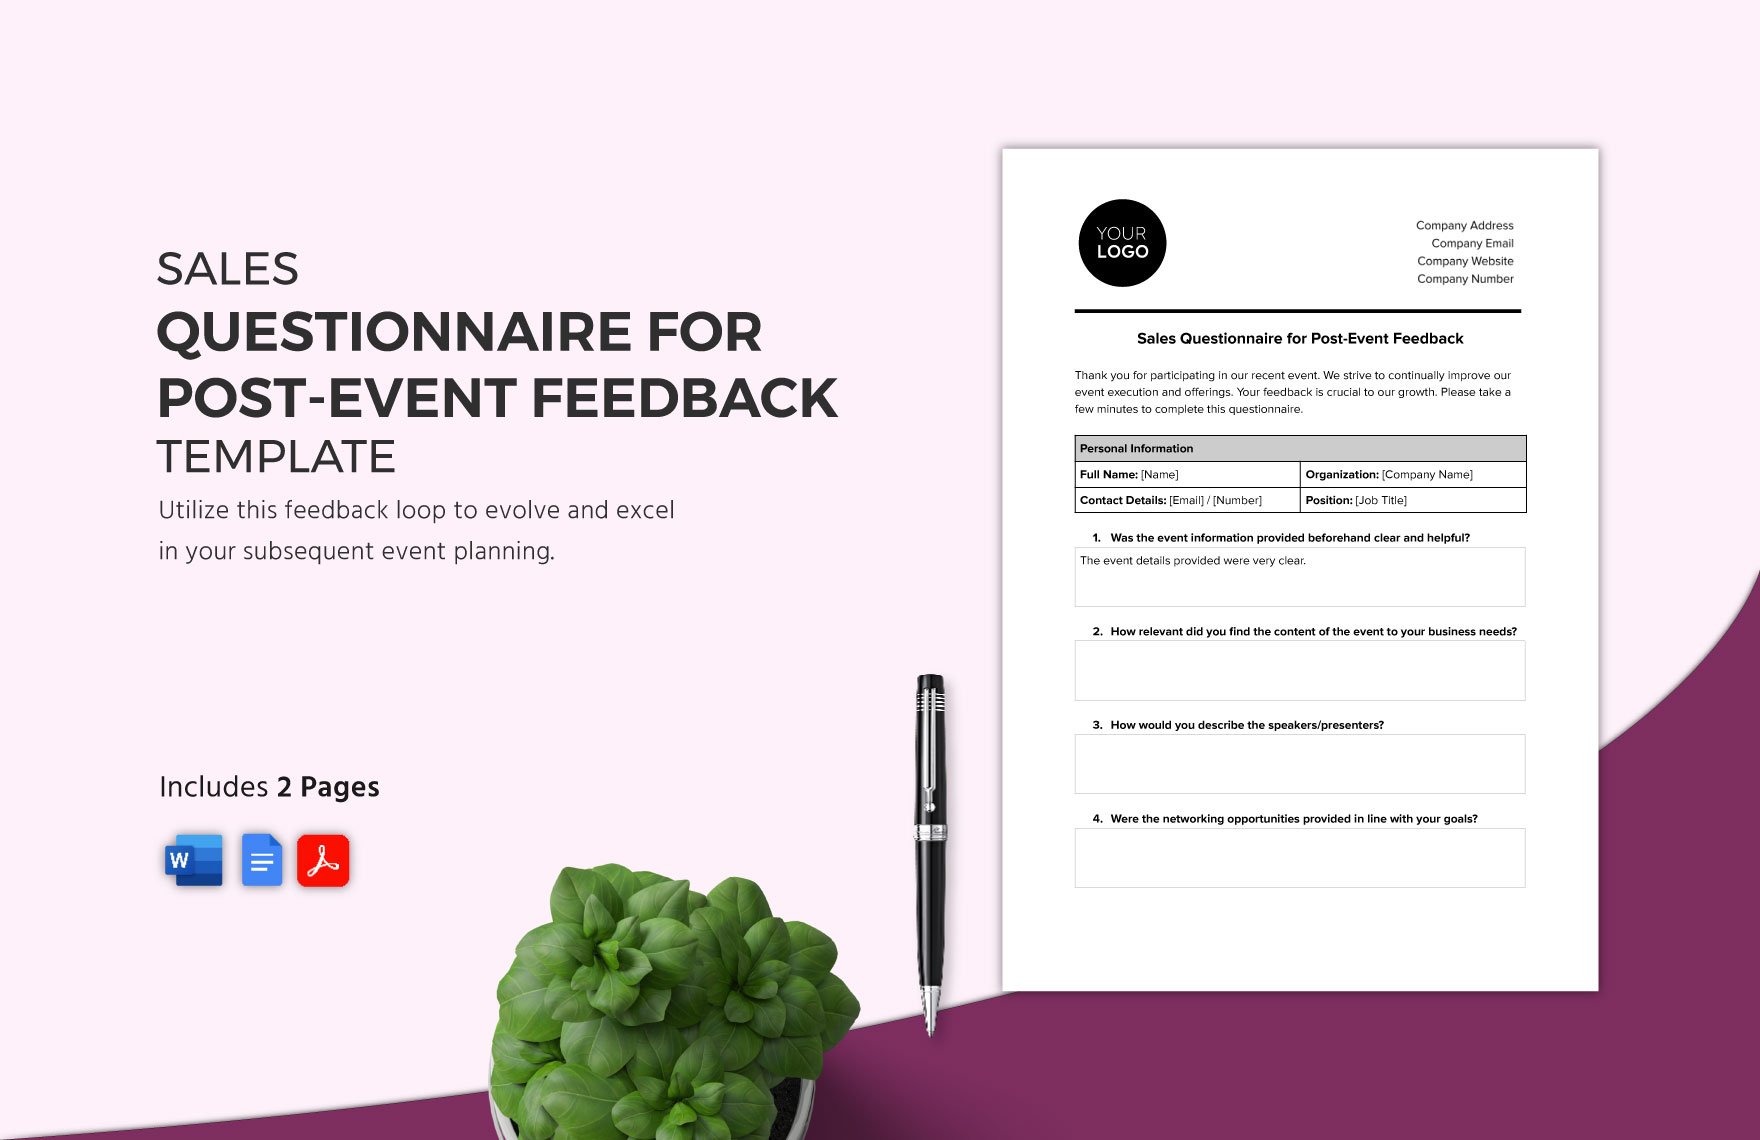 Sales Questionnaire for Post-Event Feedback Template